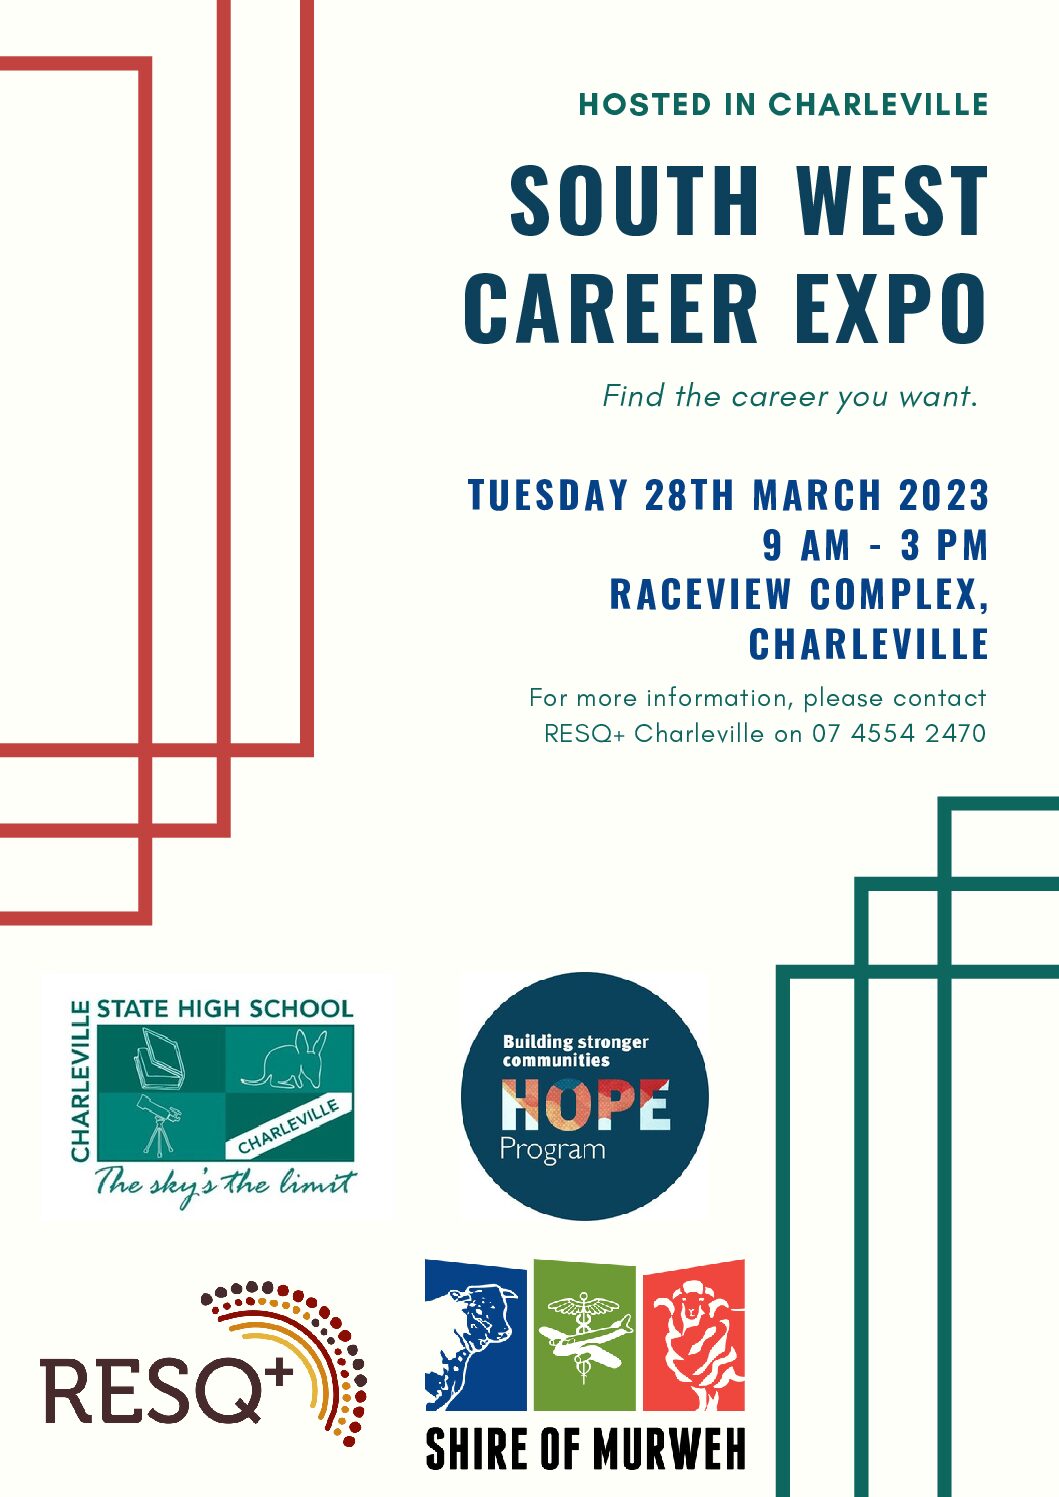 South West Career Expo 2023